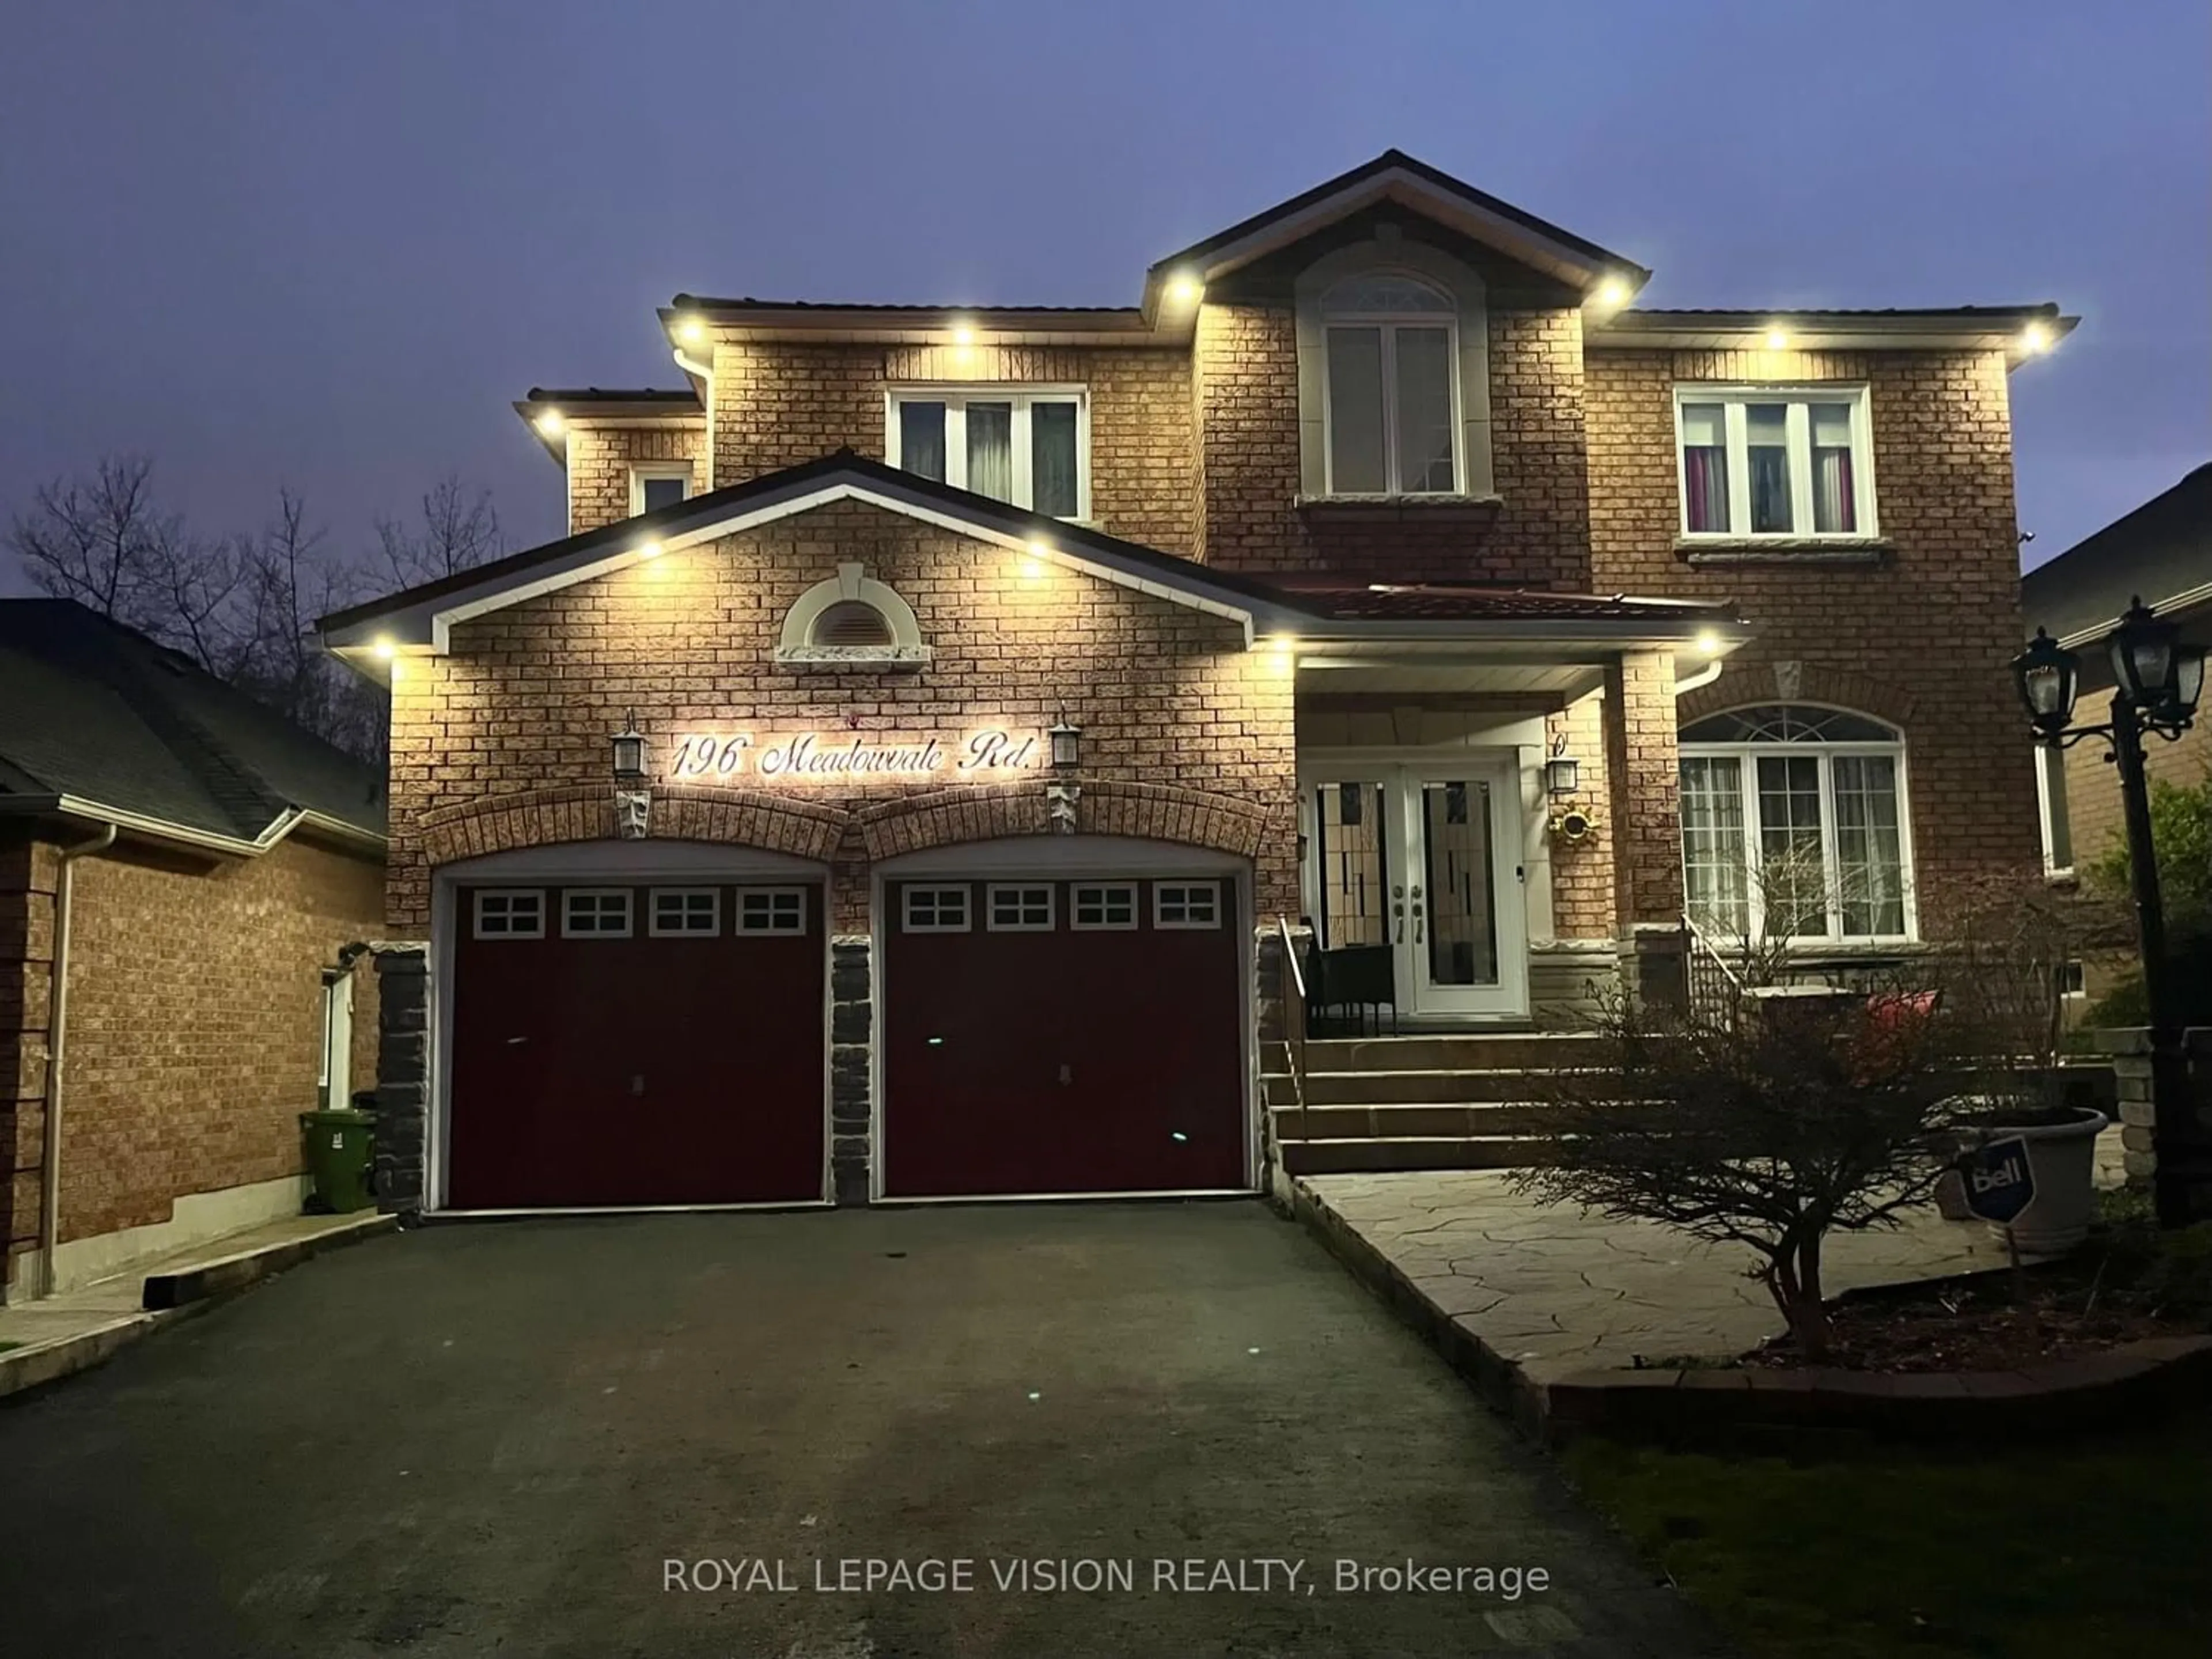 Home with brick exterior material for 196 Meadowvale Rd, Toronto Ontario M1C 1S4